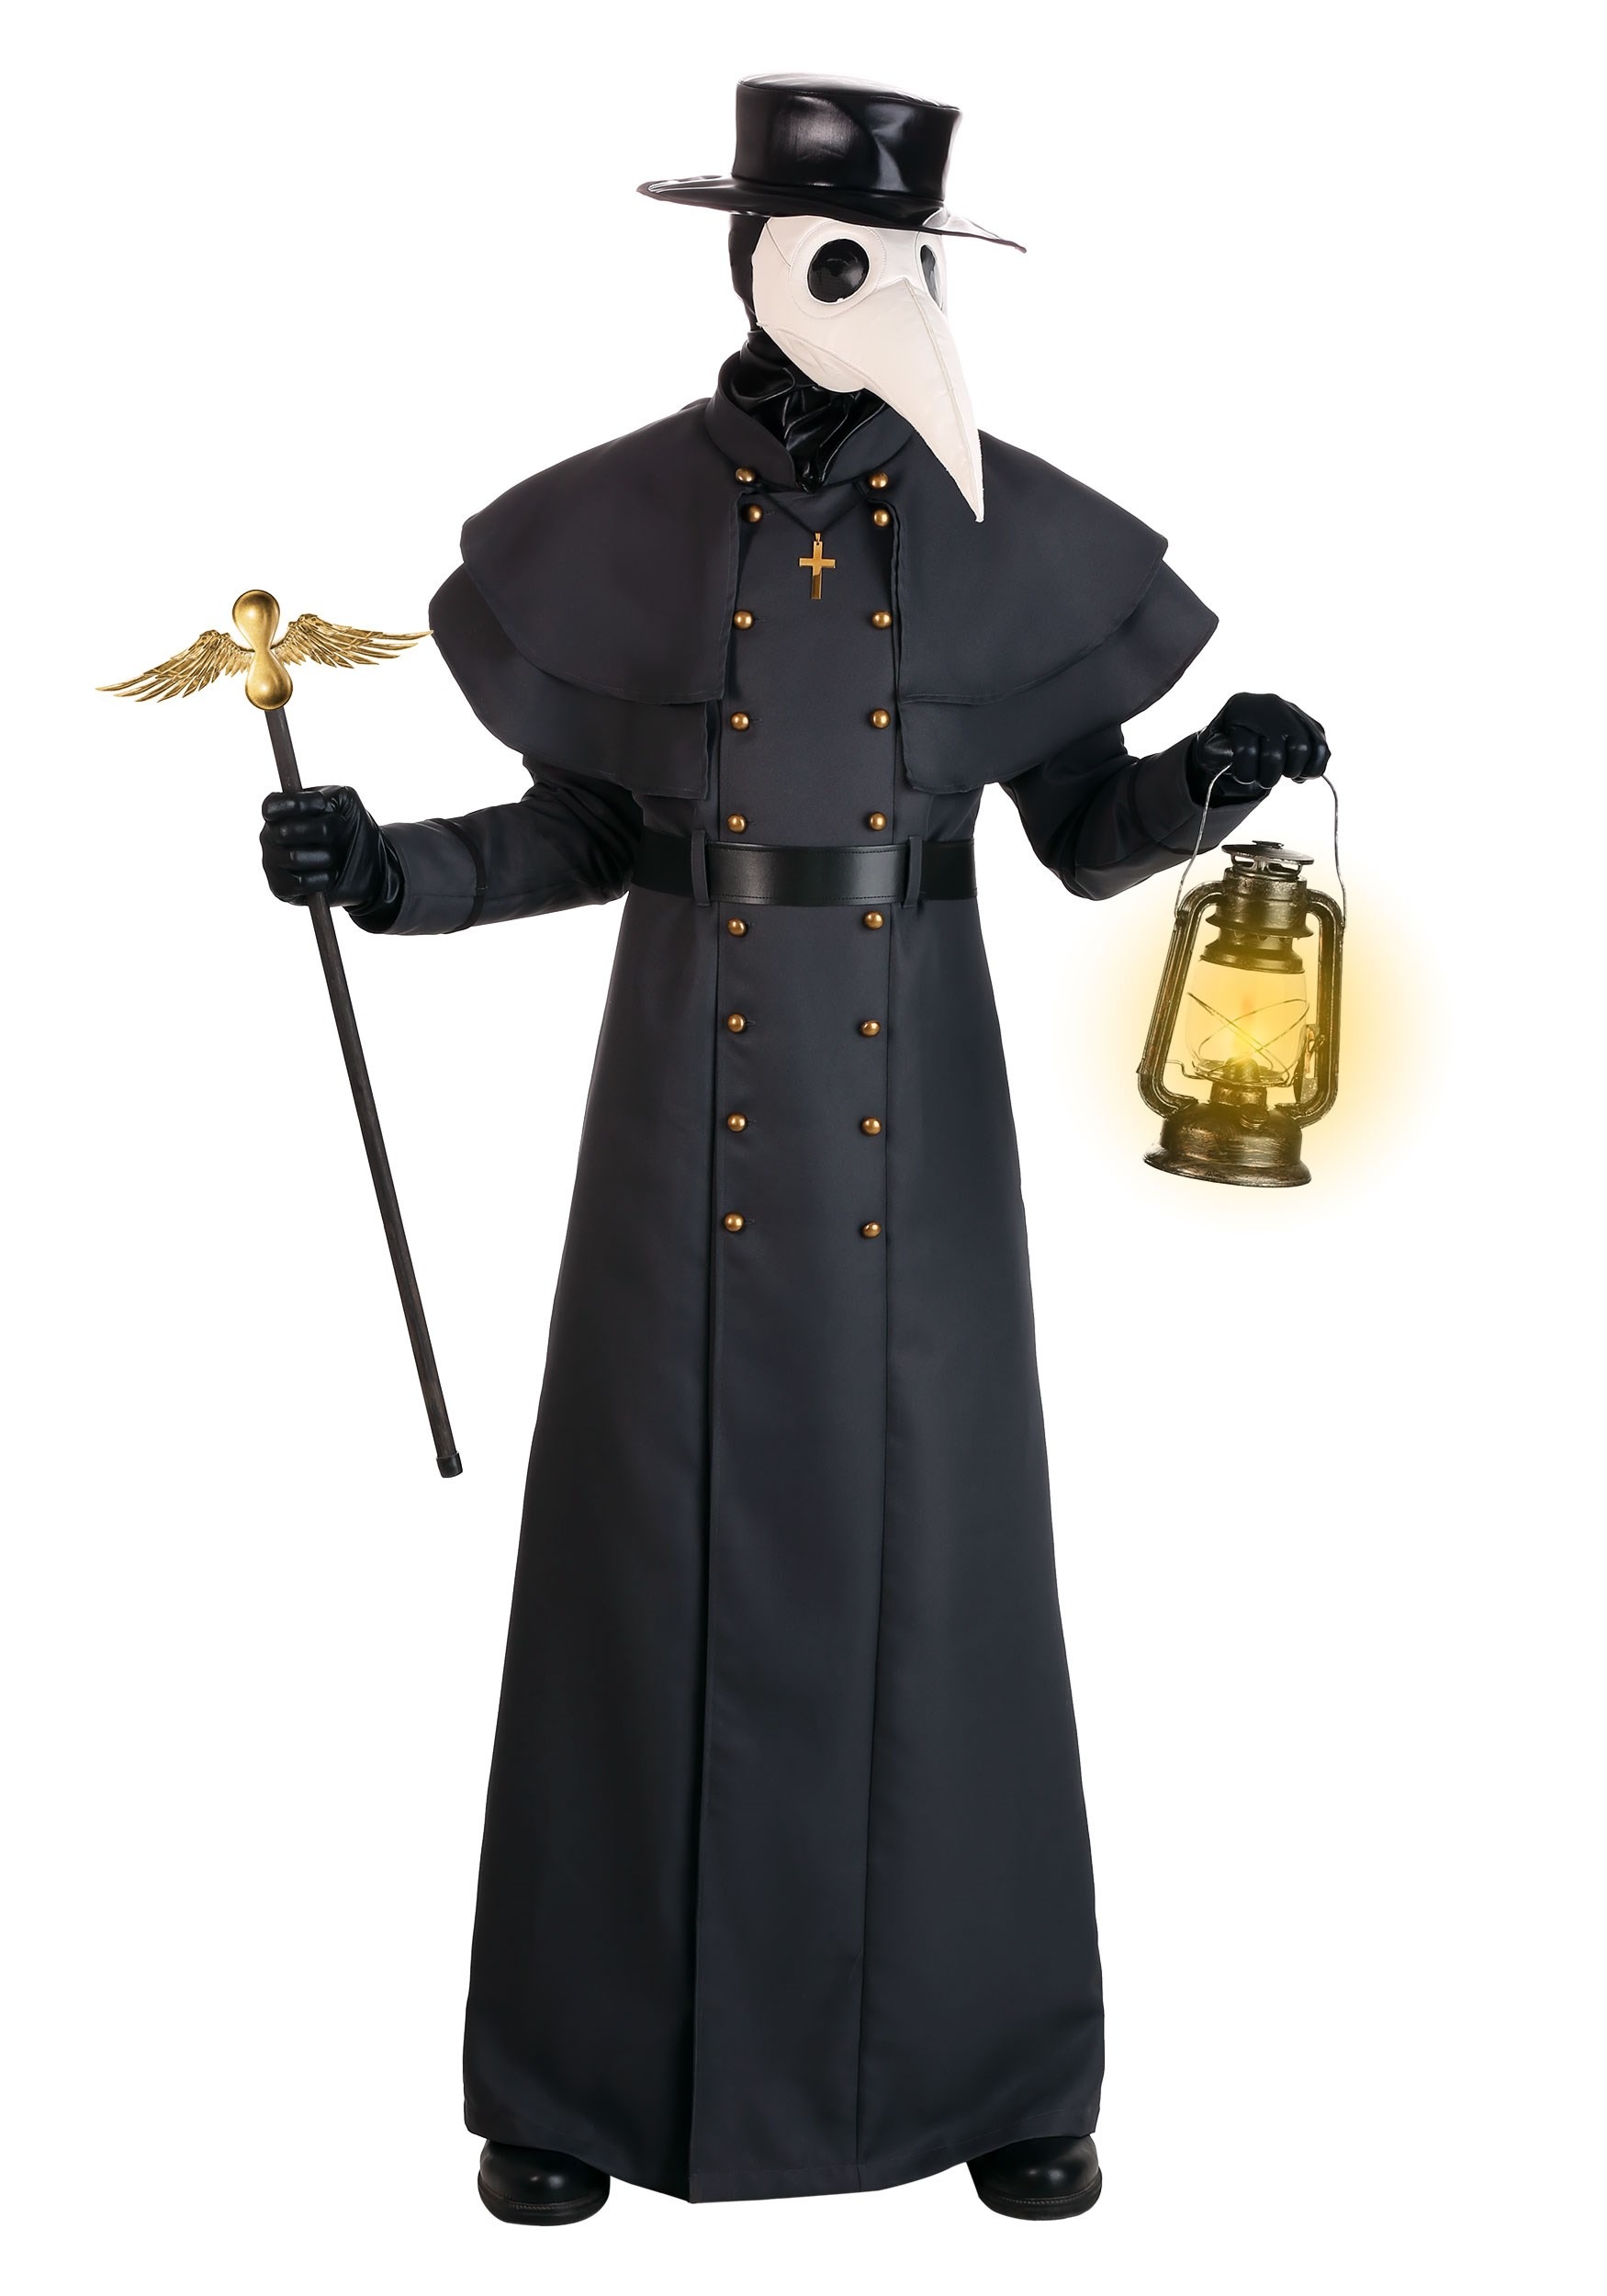 The Plague Doctor Costume